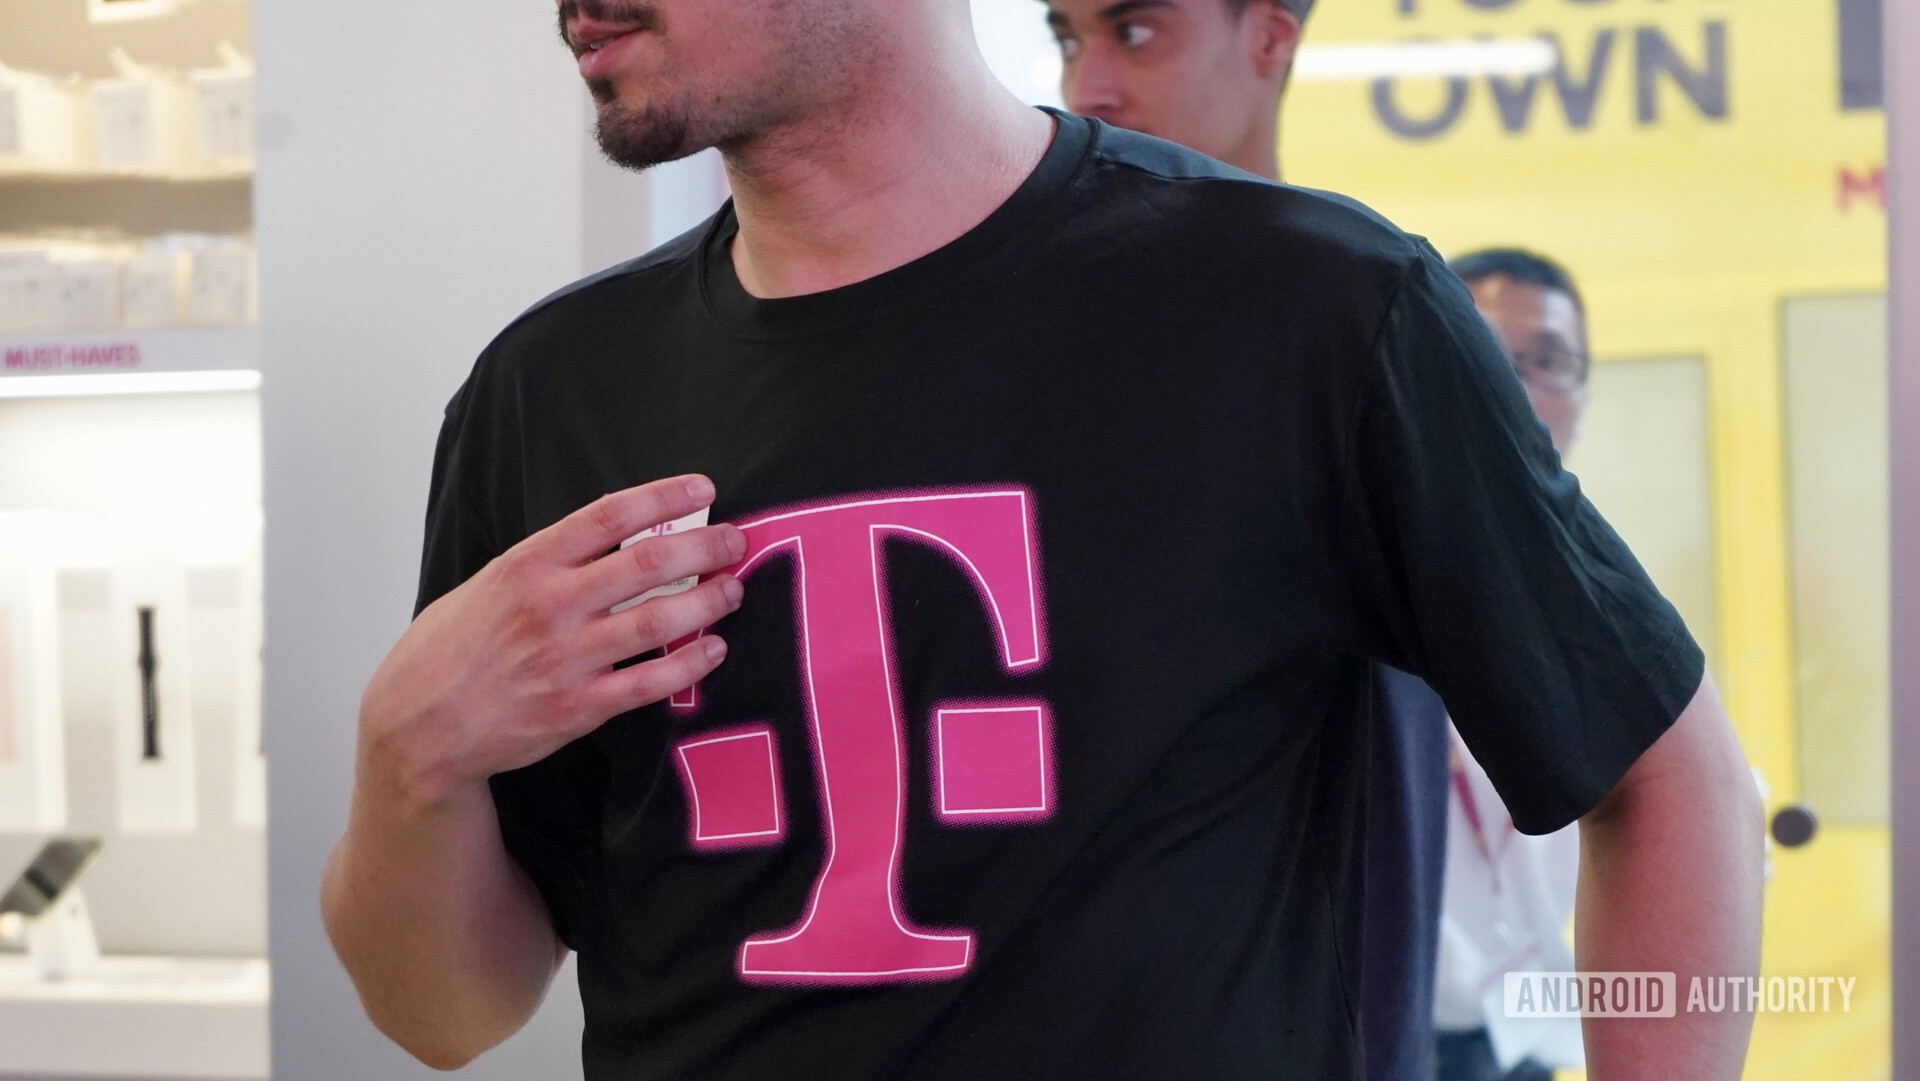 A T-Mobile employee selling T-Mobile 5G service while wearing a black t-shirt with the T-Mobile logo.